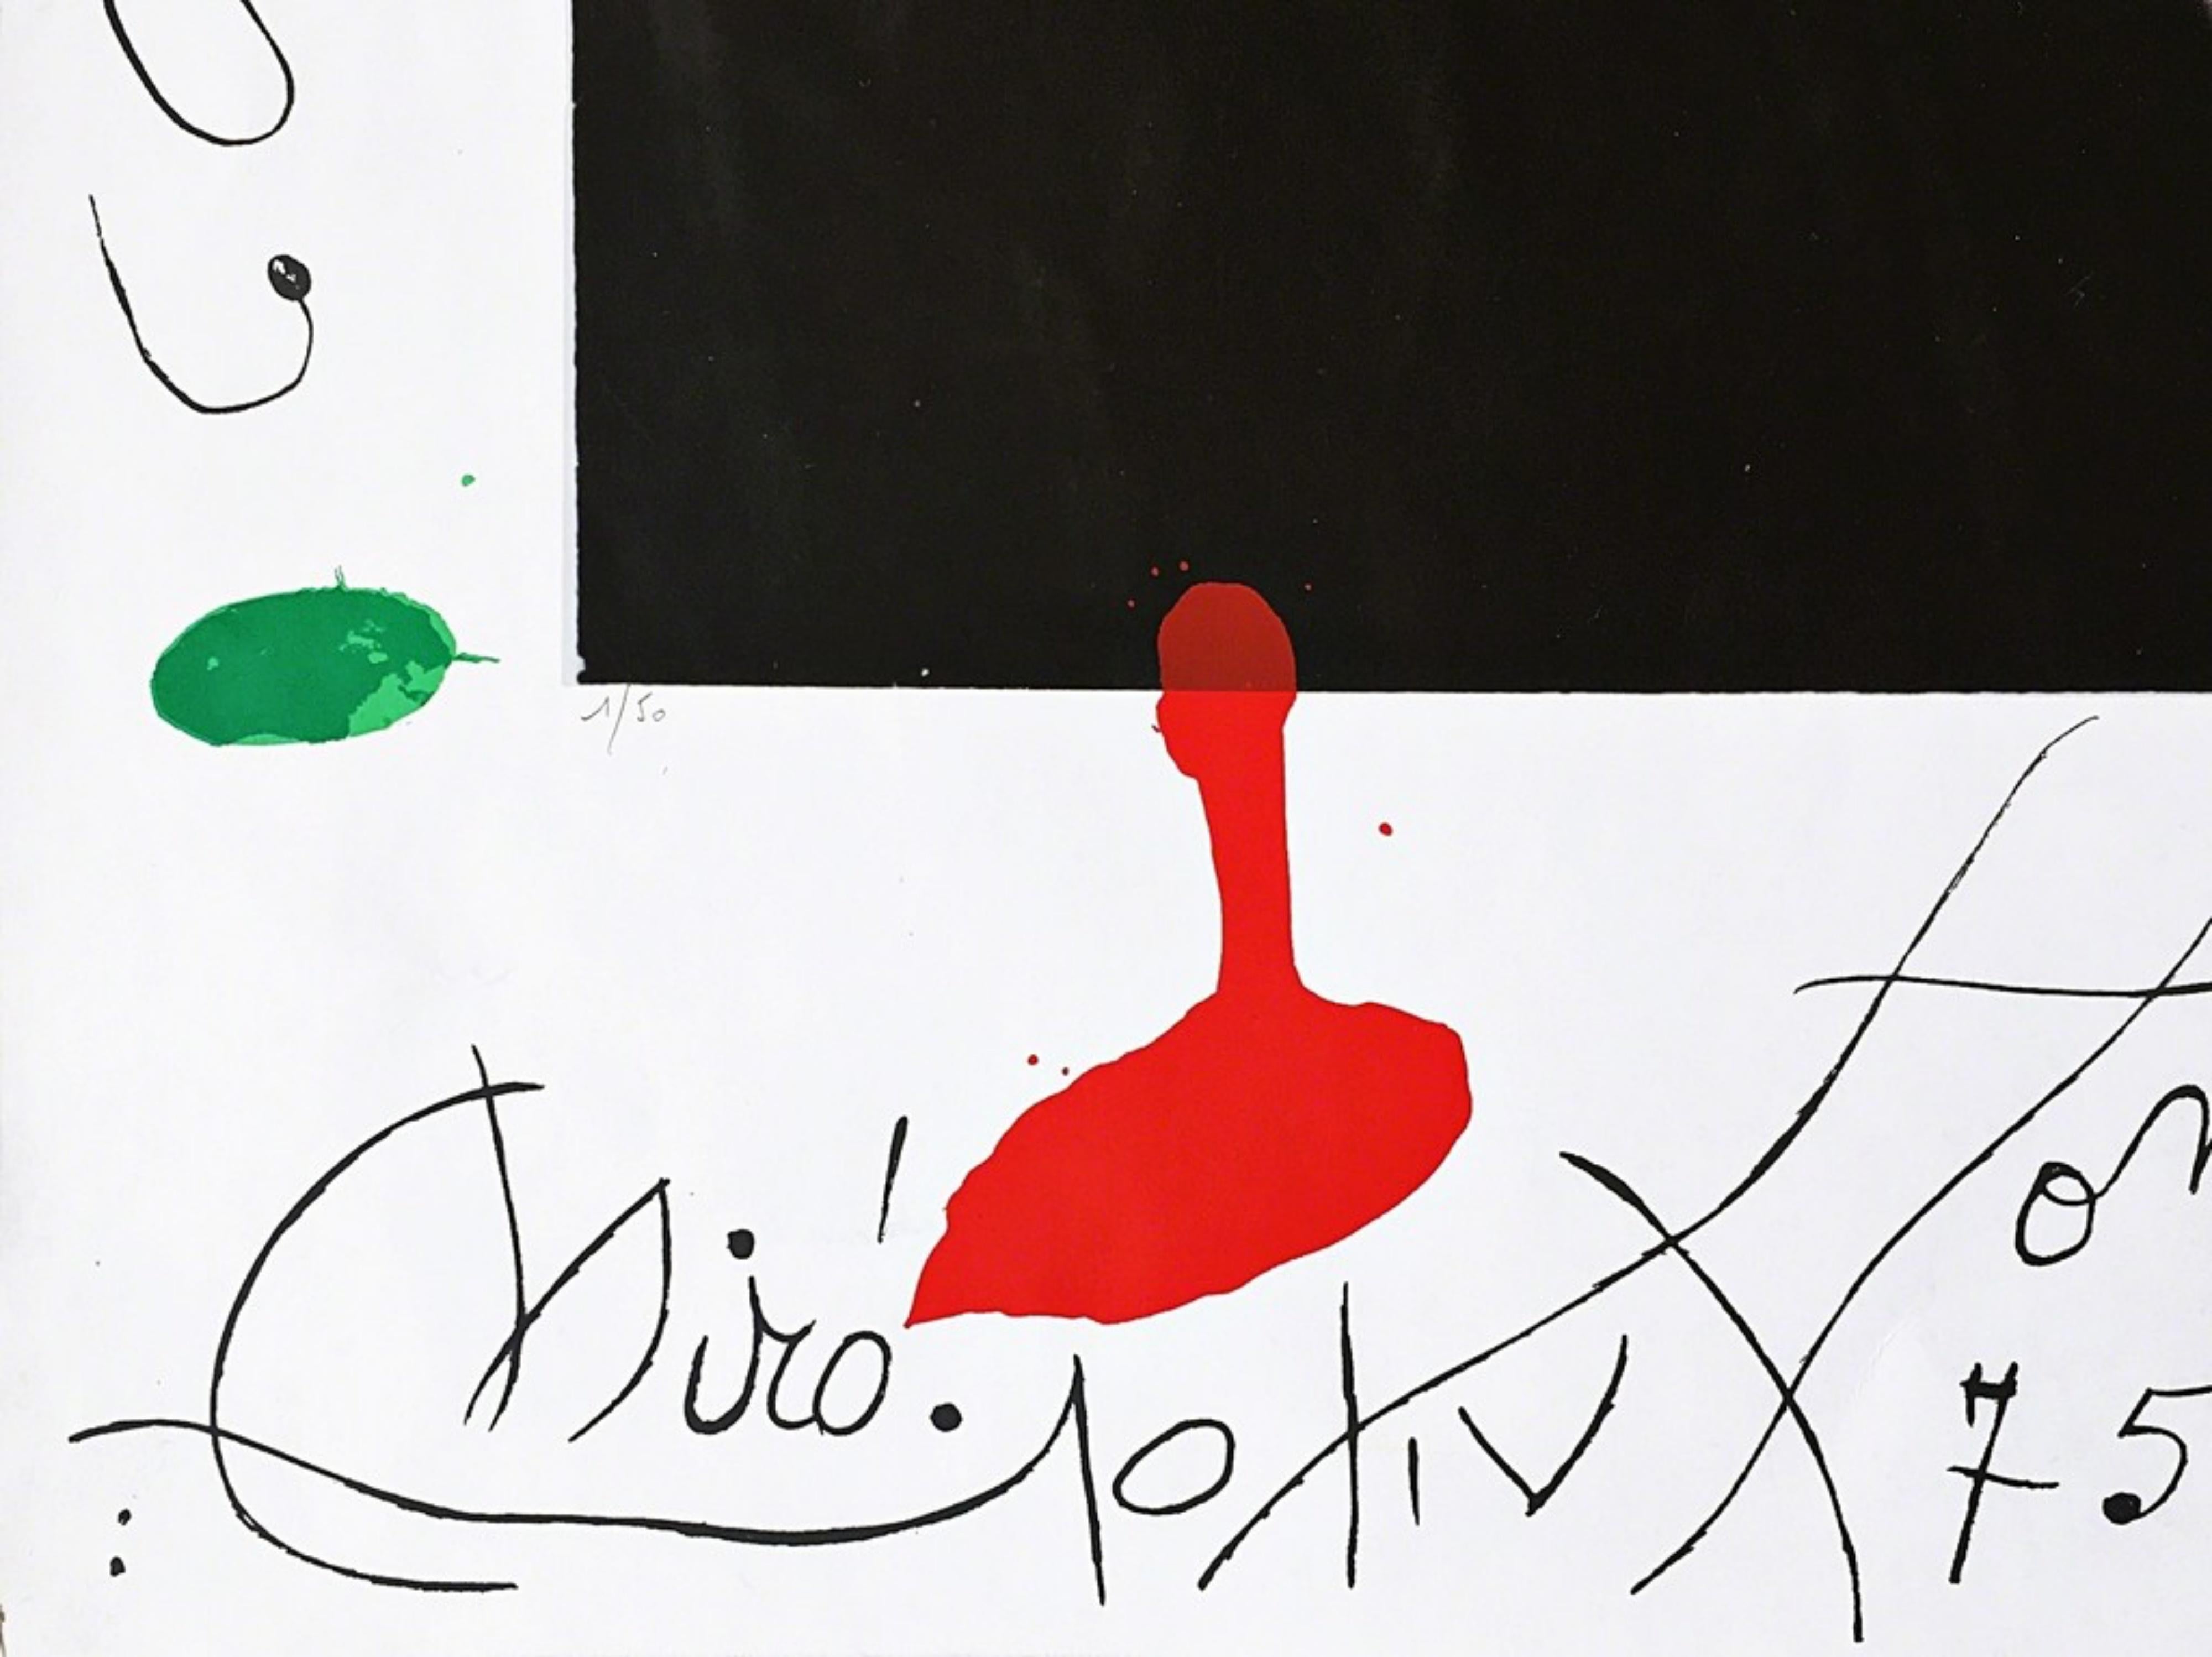 Joan Miro
Hommage à Picasso (Homage to Picasso), 1975
Silkscreen and Photograph on wove paper. Signed Twice: Hand Signed, numbered 1/50 in pencil and dated, and also signed on the plate. (from a very low edition of only 50)
20 × 24